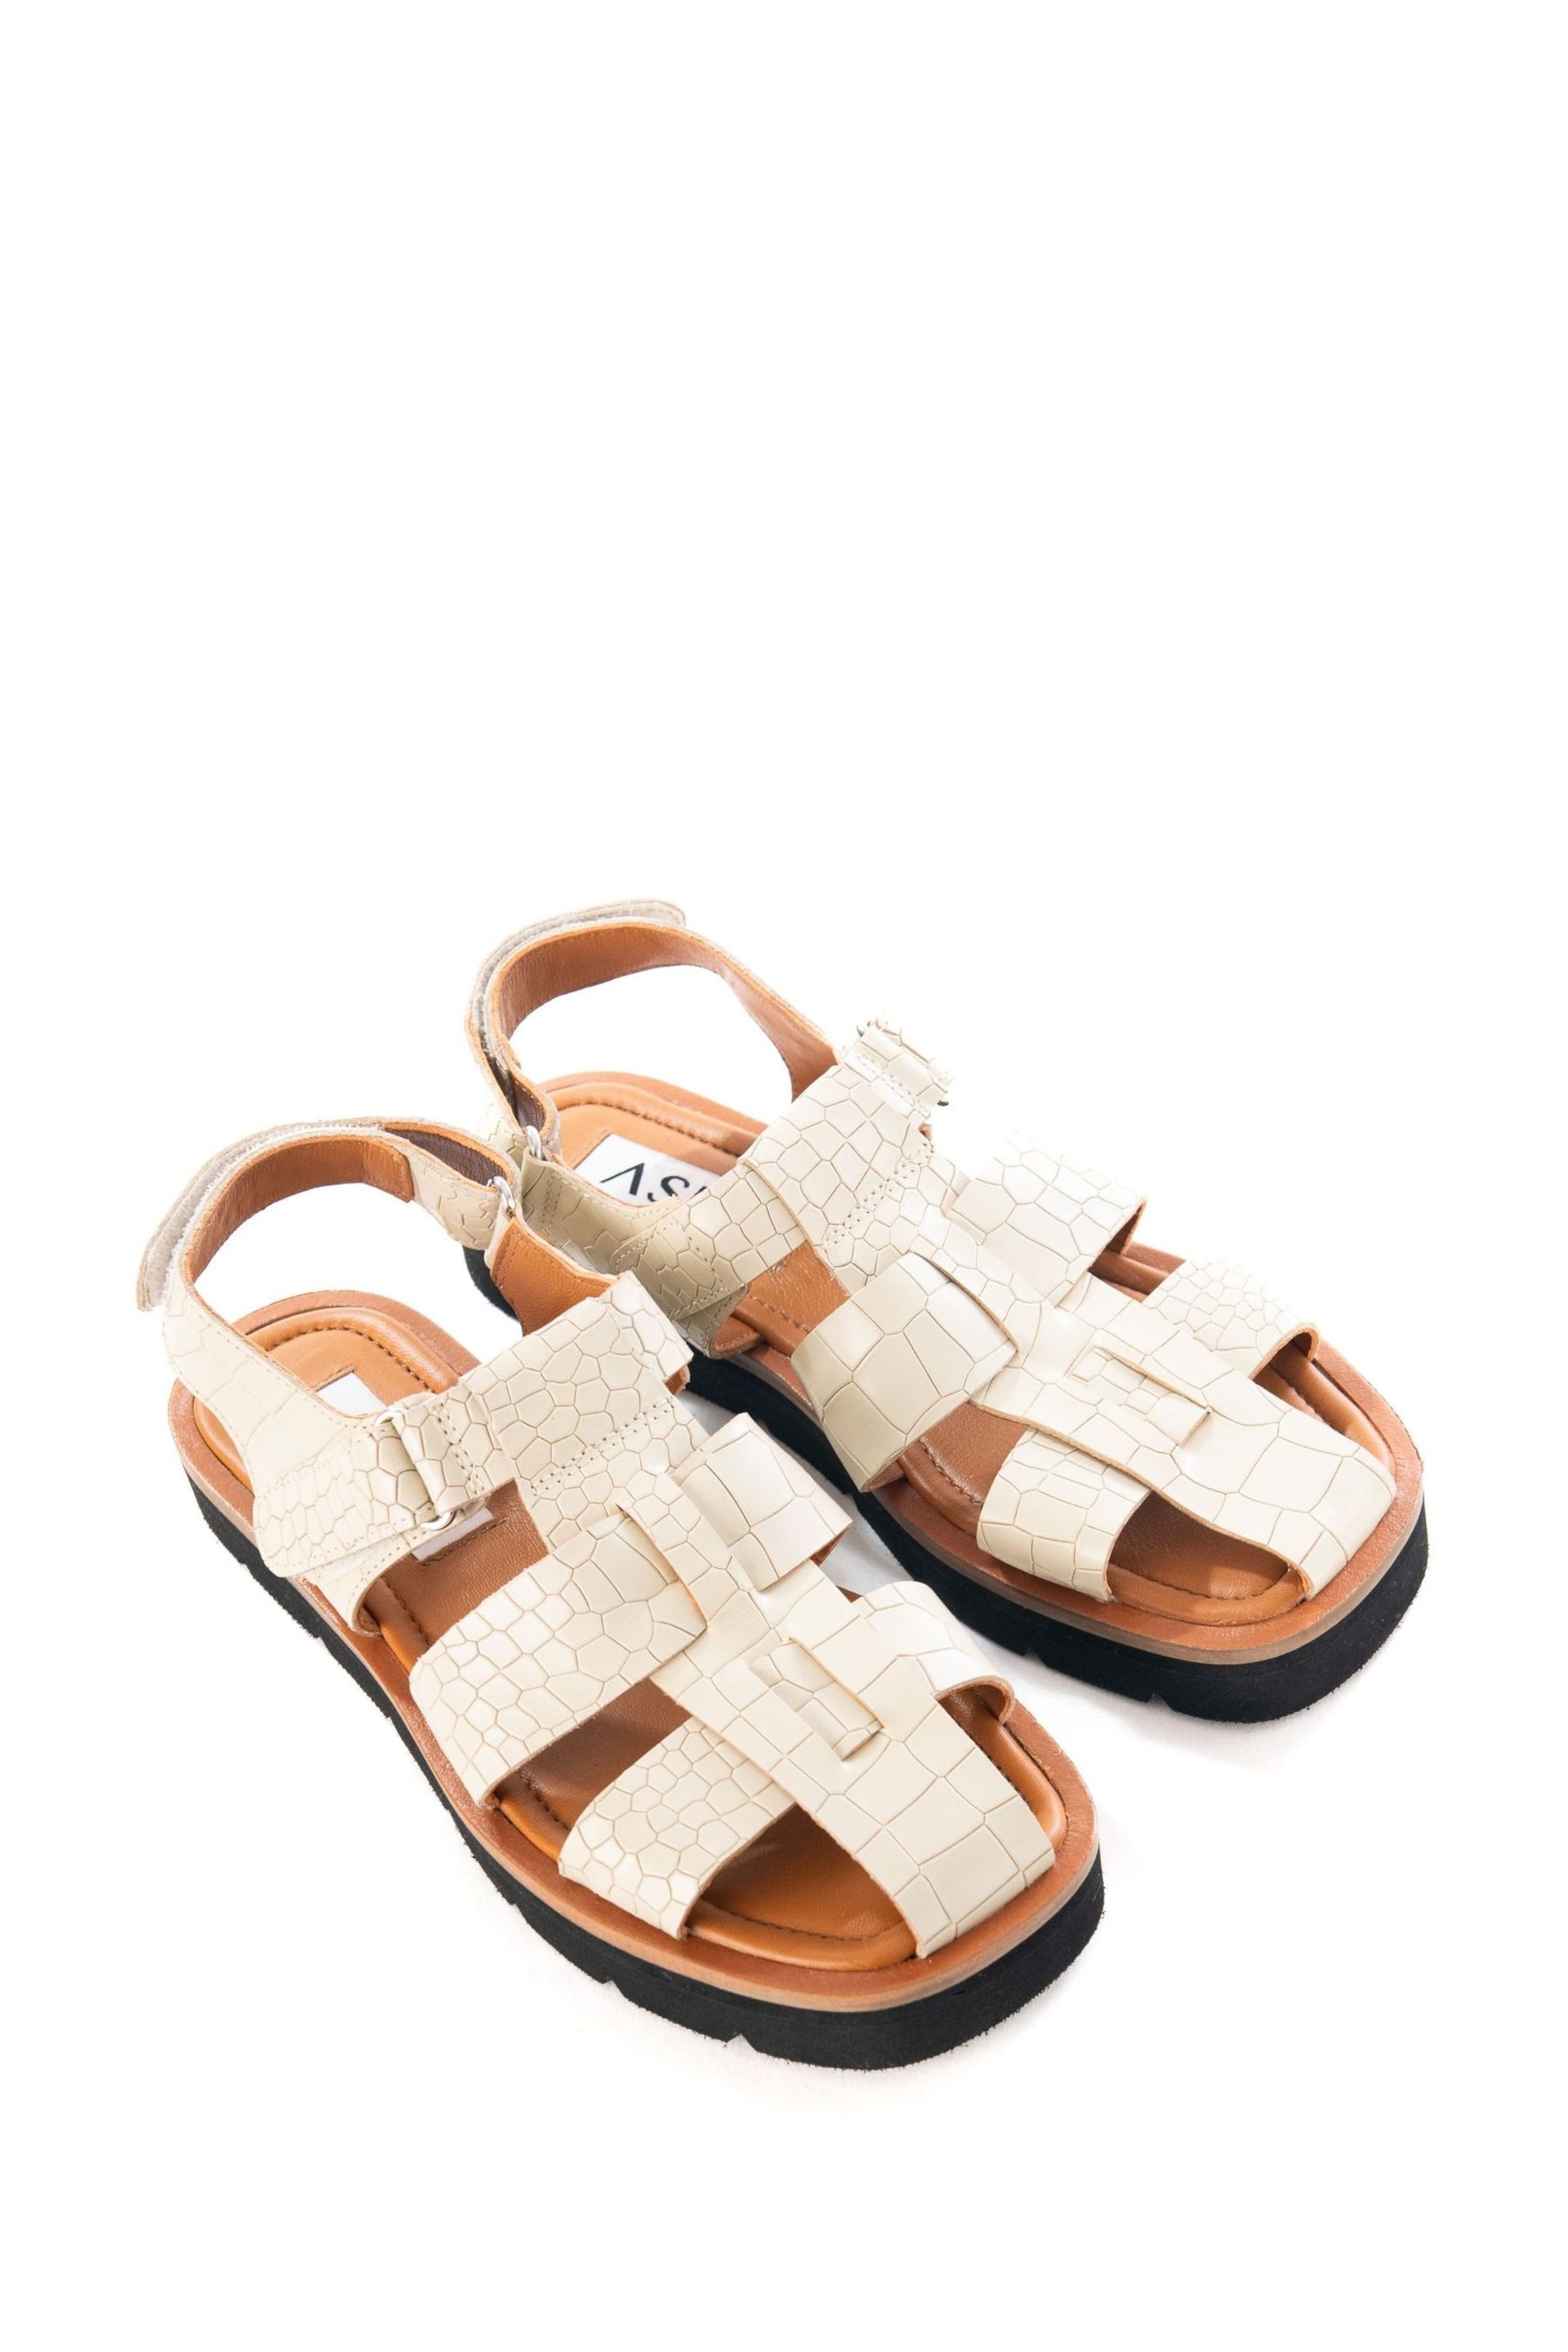 ASRA London Maddie Croc Effect Leather Fisherman White Sandals - Image 3 of 4